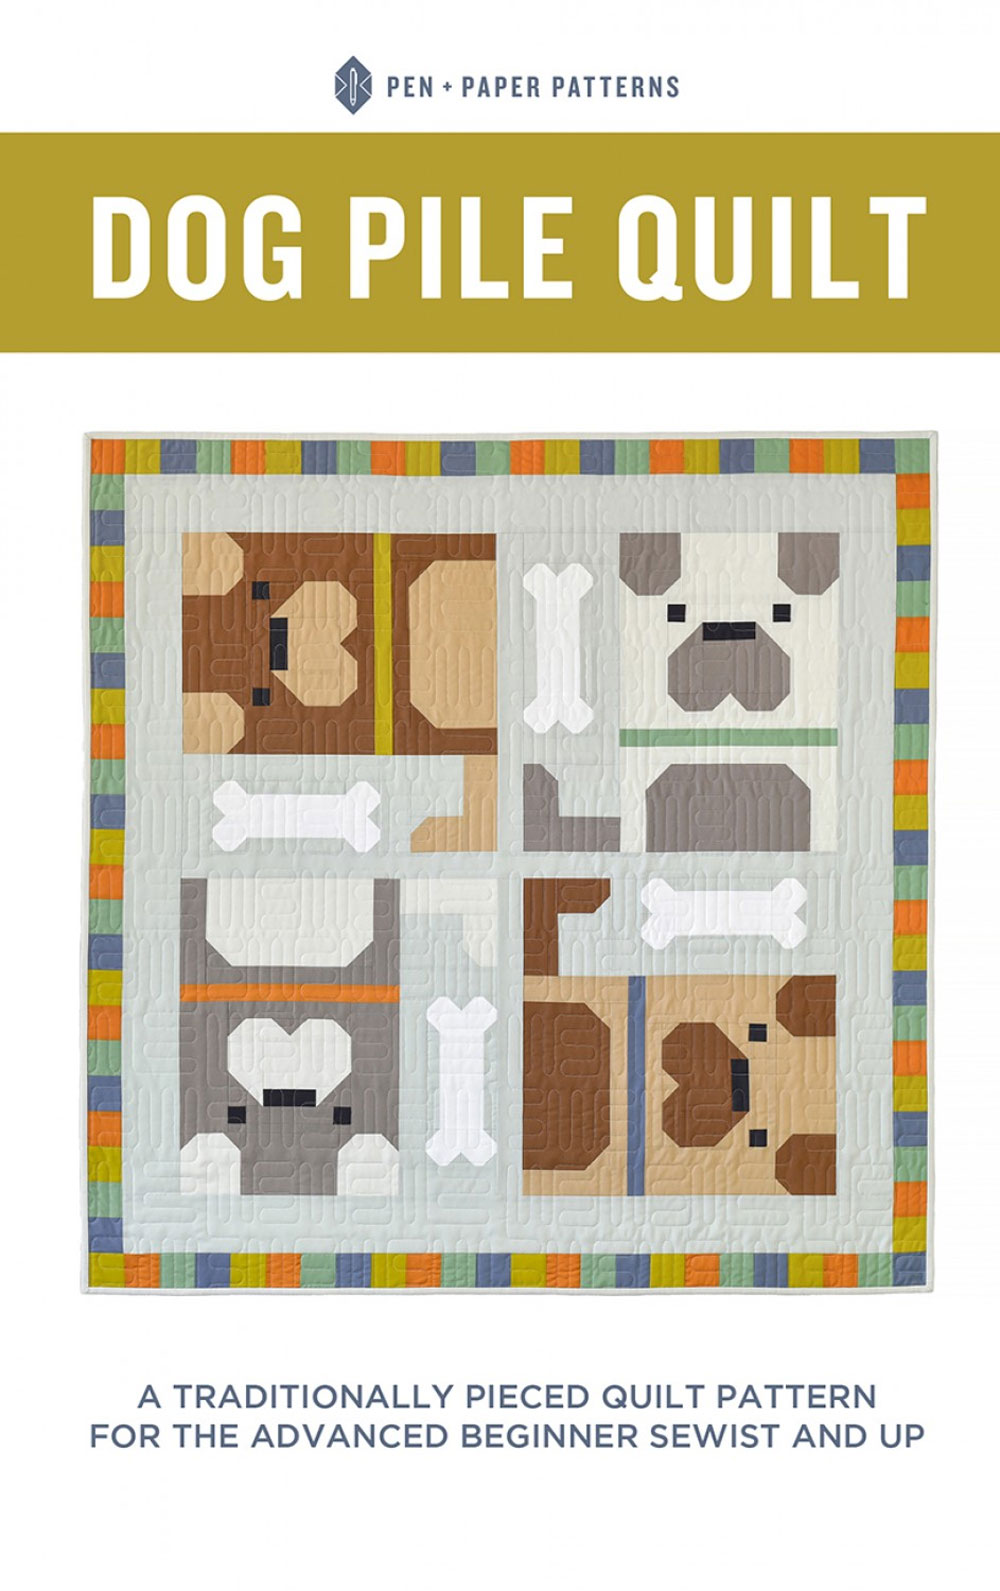 Dog-Pile-quilt-sewing-pattern-from-Pen-plus-paper-patterns-front